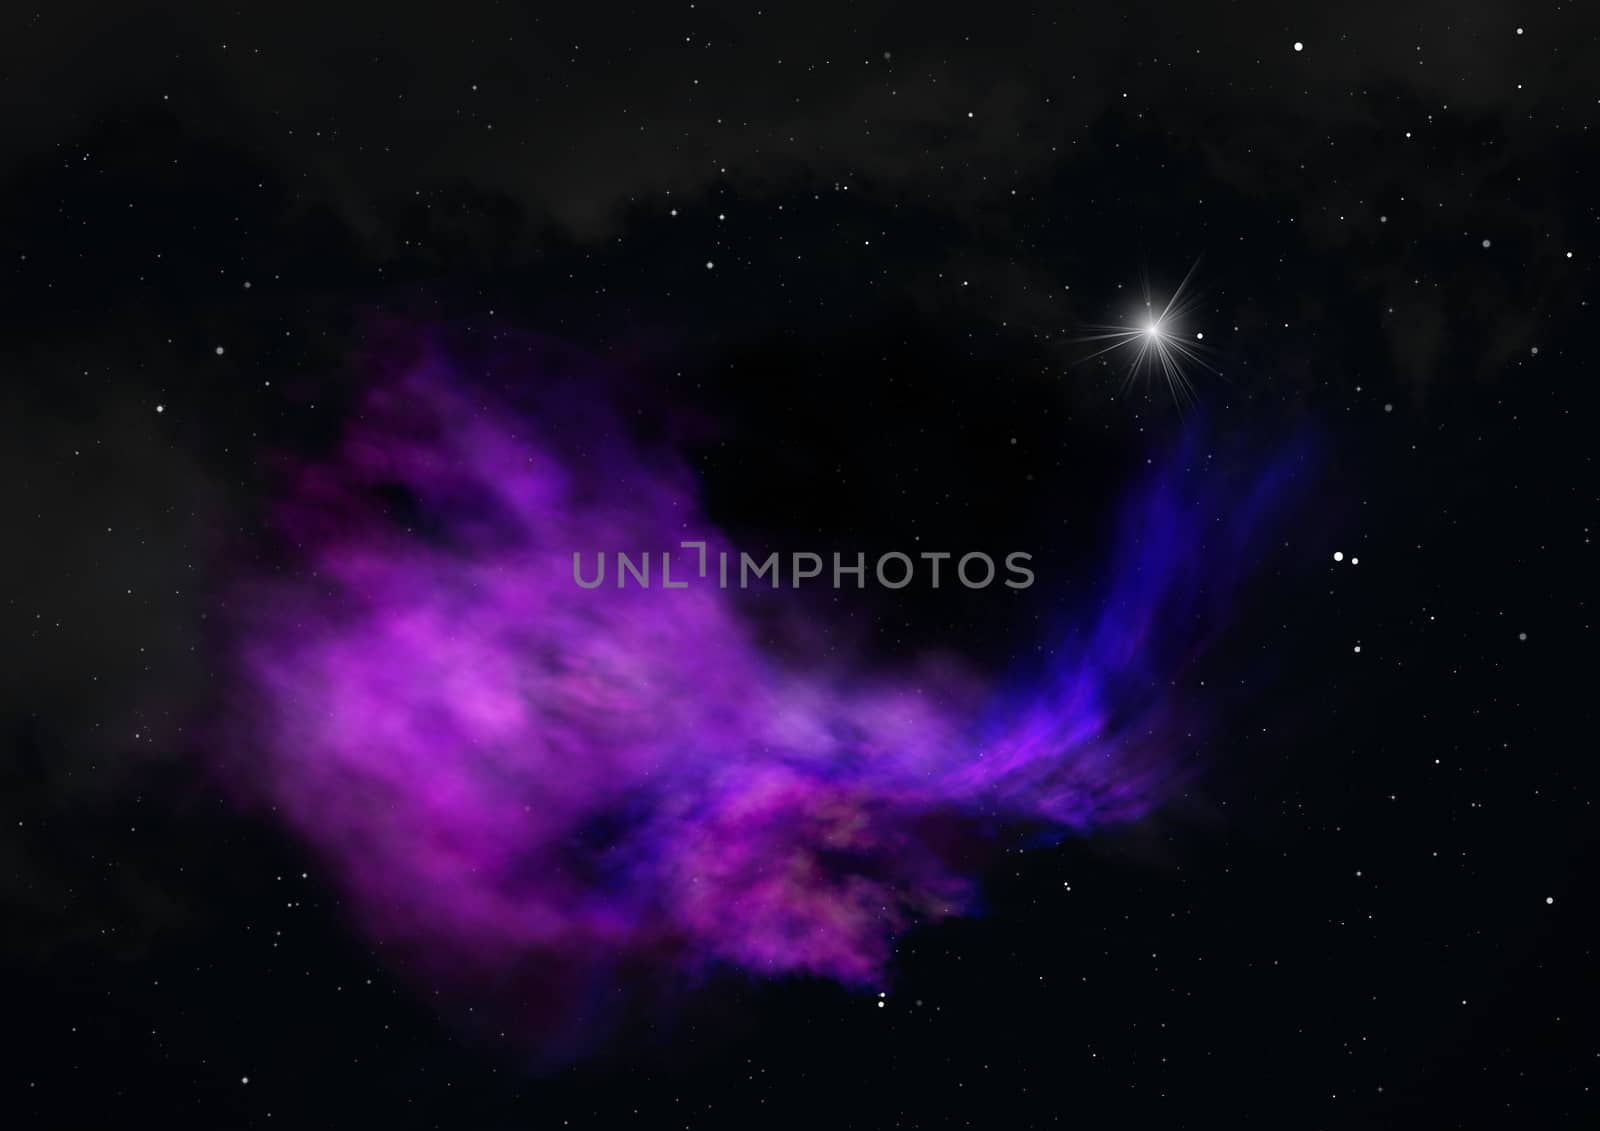 Star field in space a nebulae and a gas congestion. "Elements of this image furnished by NASA". 3D rendering